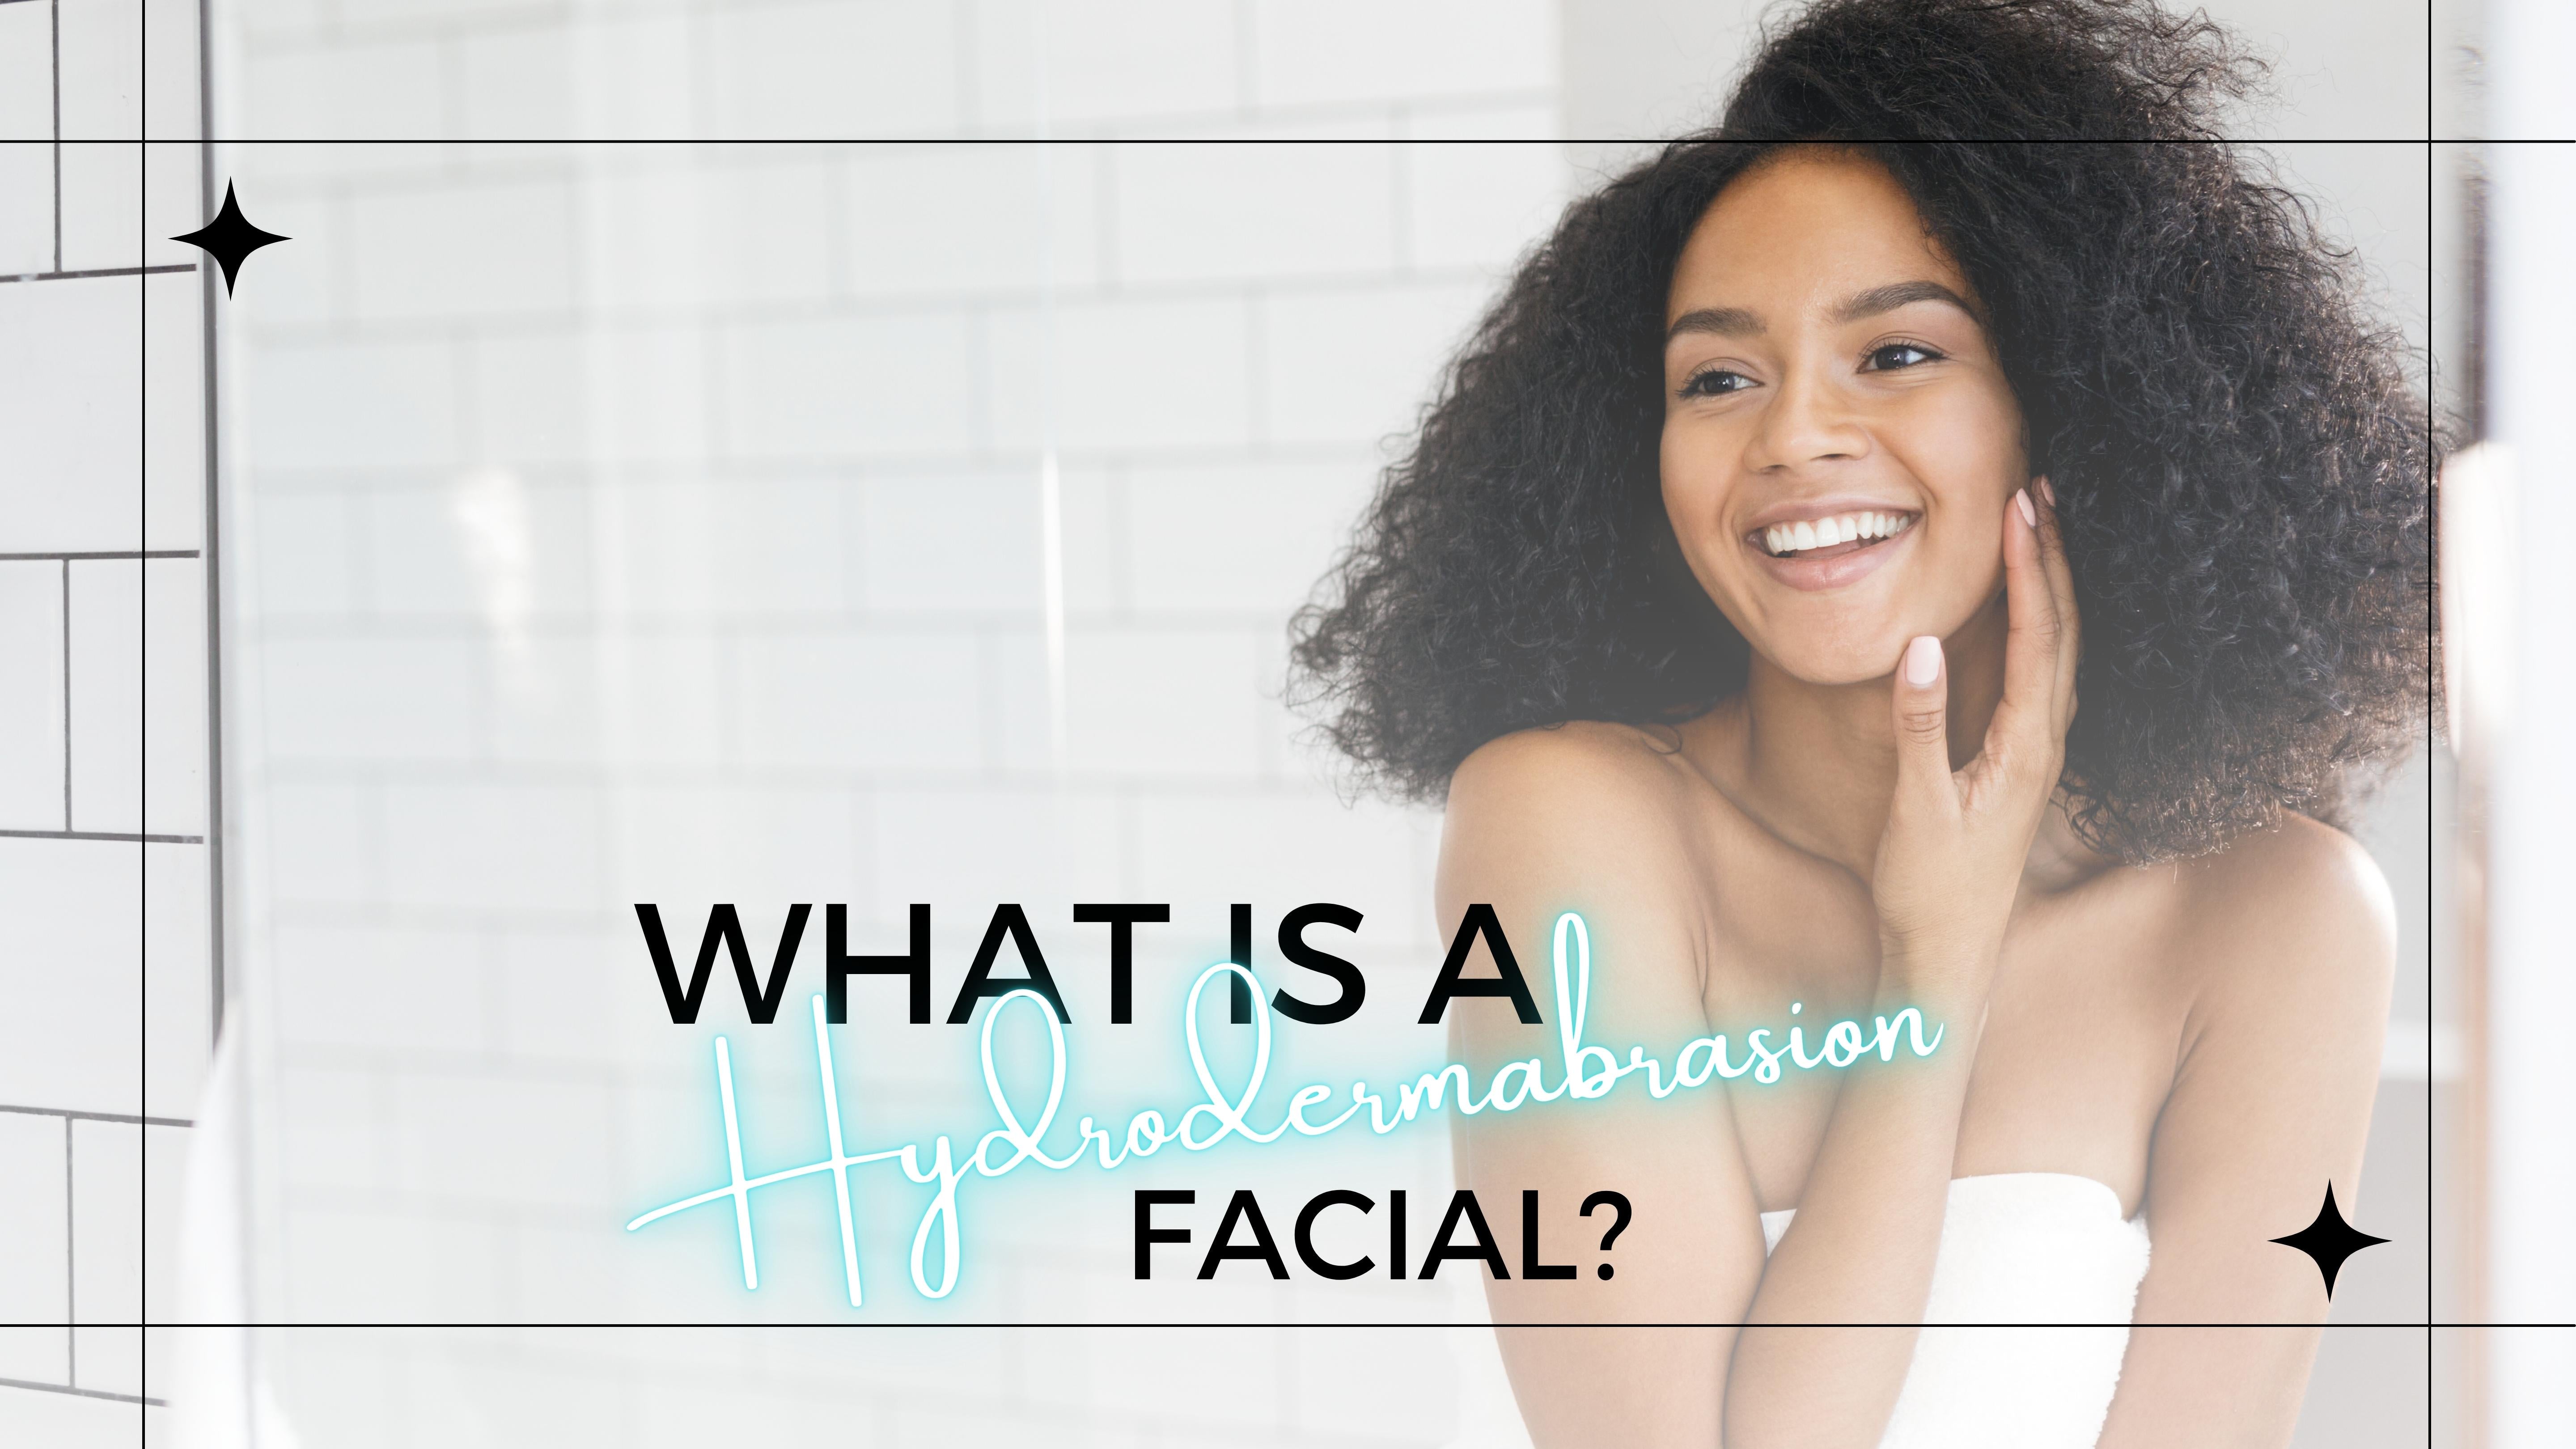 What Is A Hydrodermabrasion Facial?